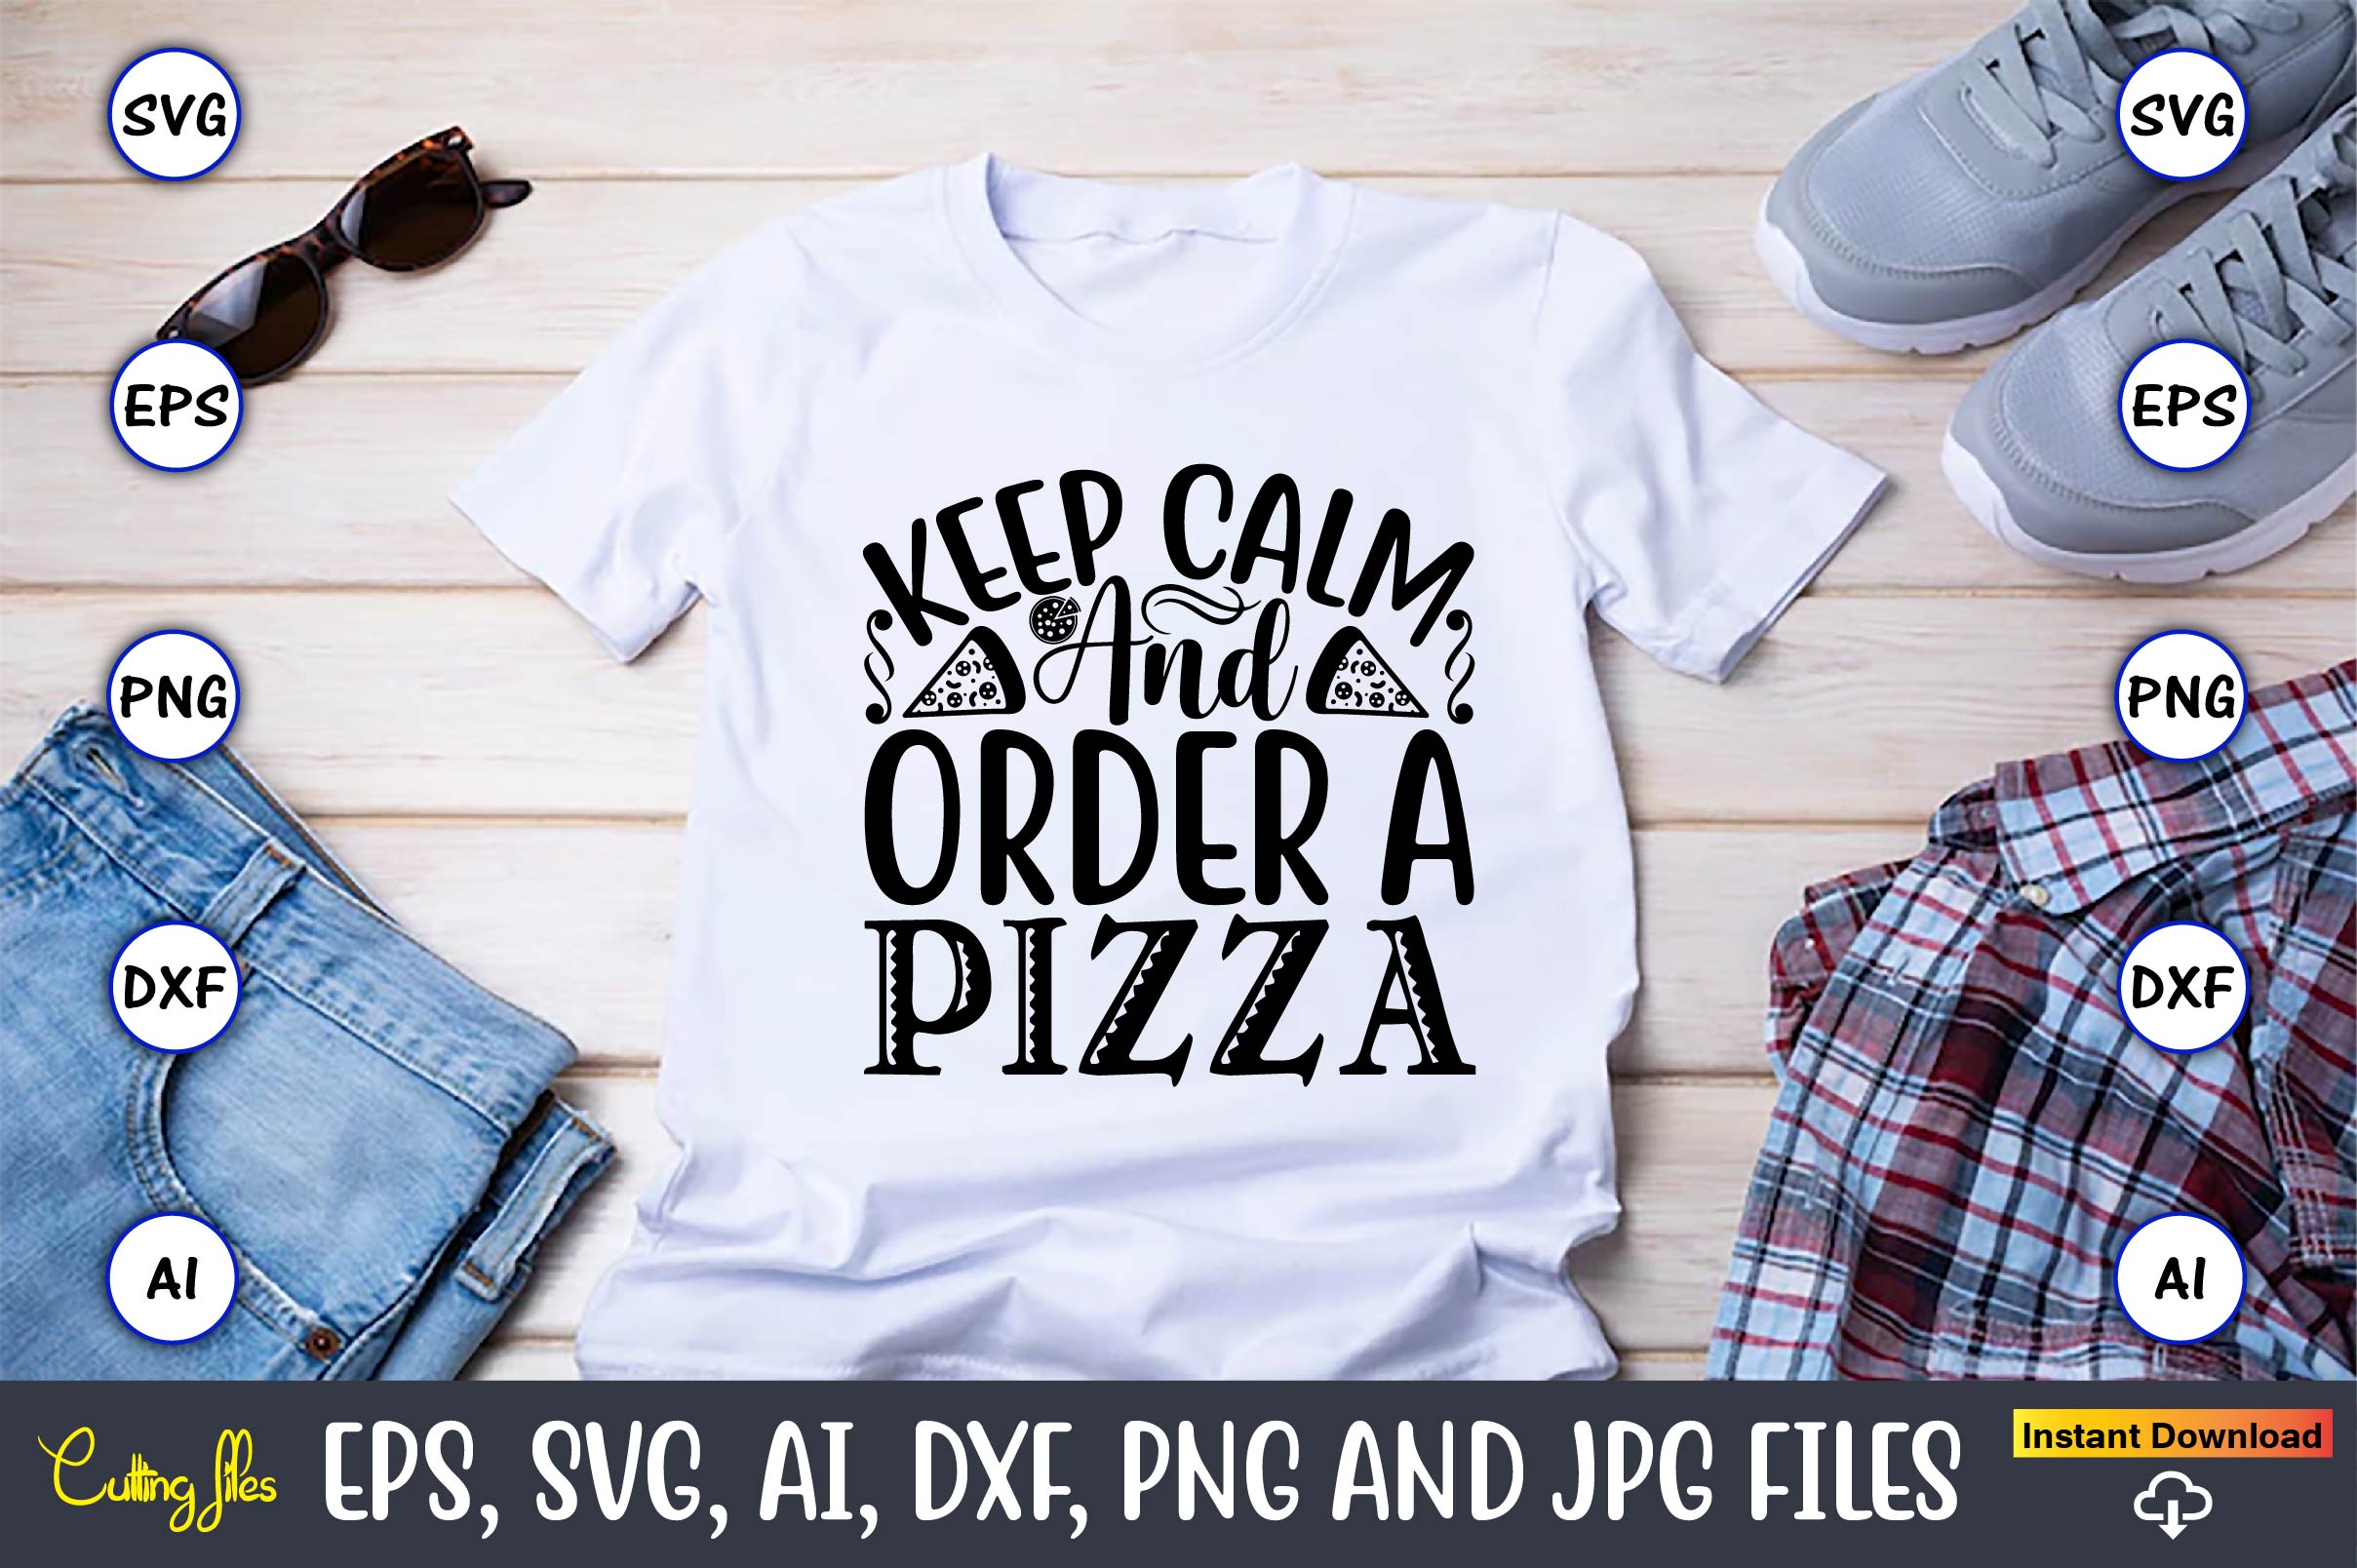 The image of a white T-shirt with the enchanting inscription Keep calm and order a pizza.